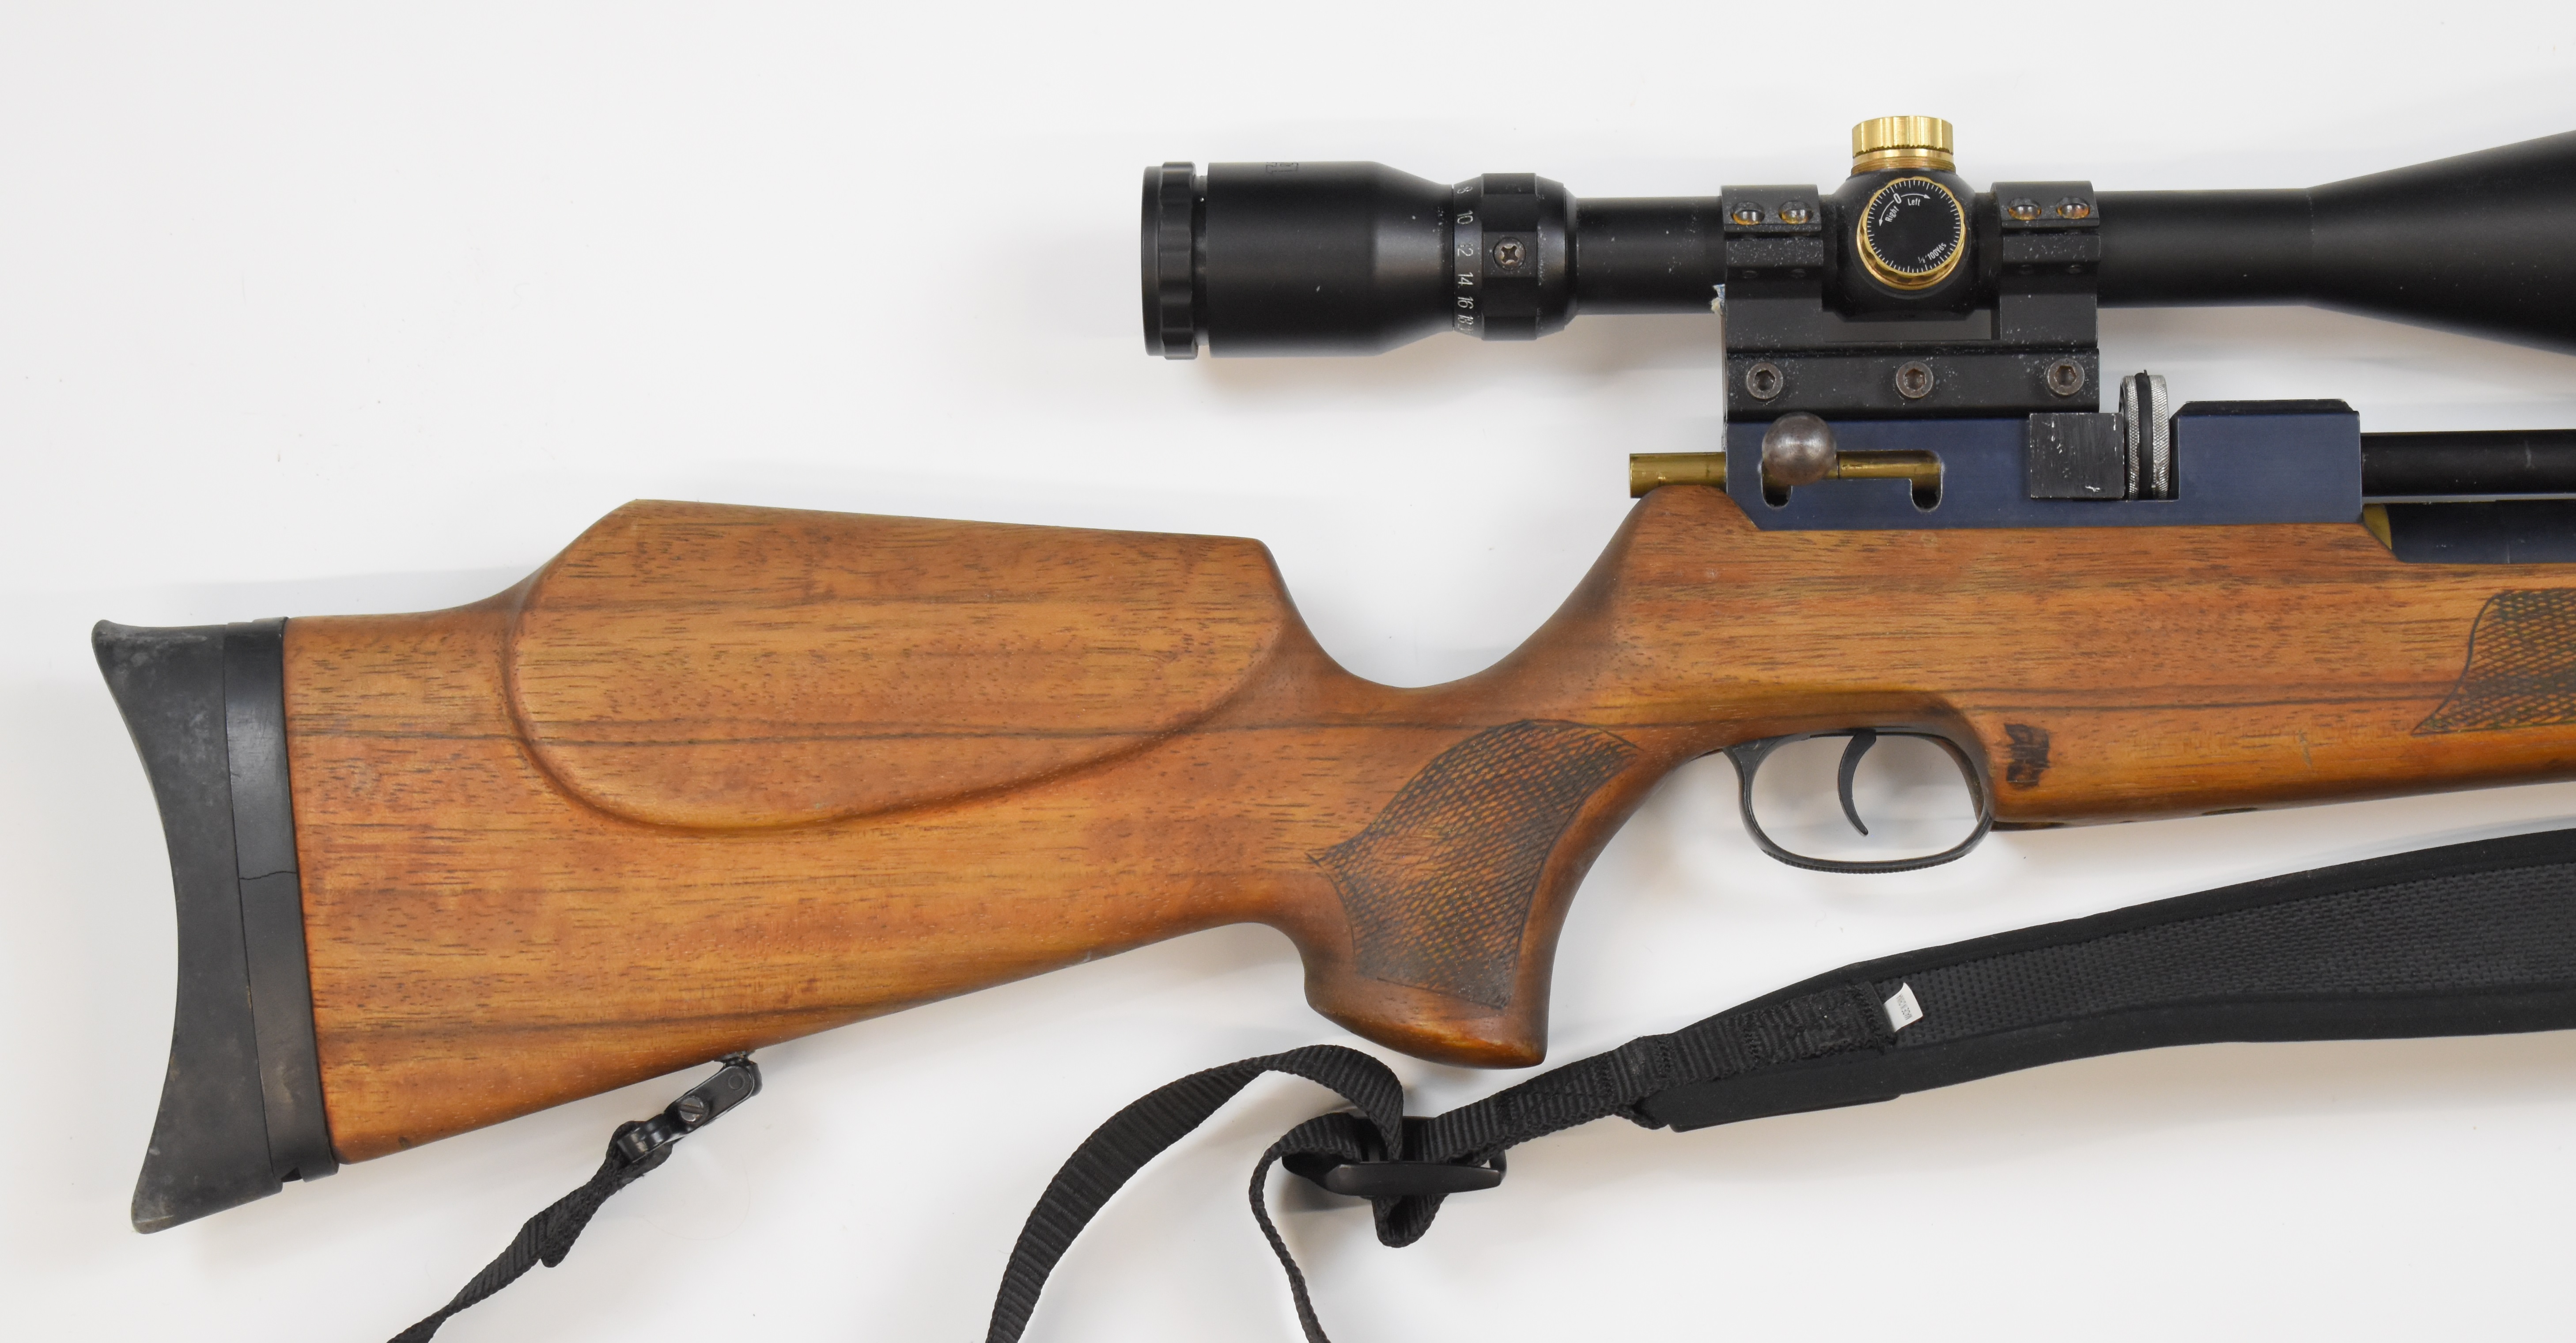 FX Logun Solo .22 PCP air rifle with chequered semi-pistol grip and forend, raised cheek piece, - Image 3 of 10